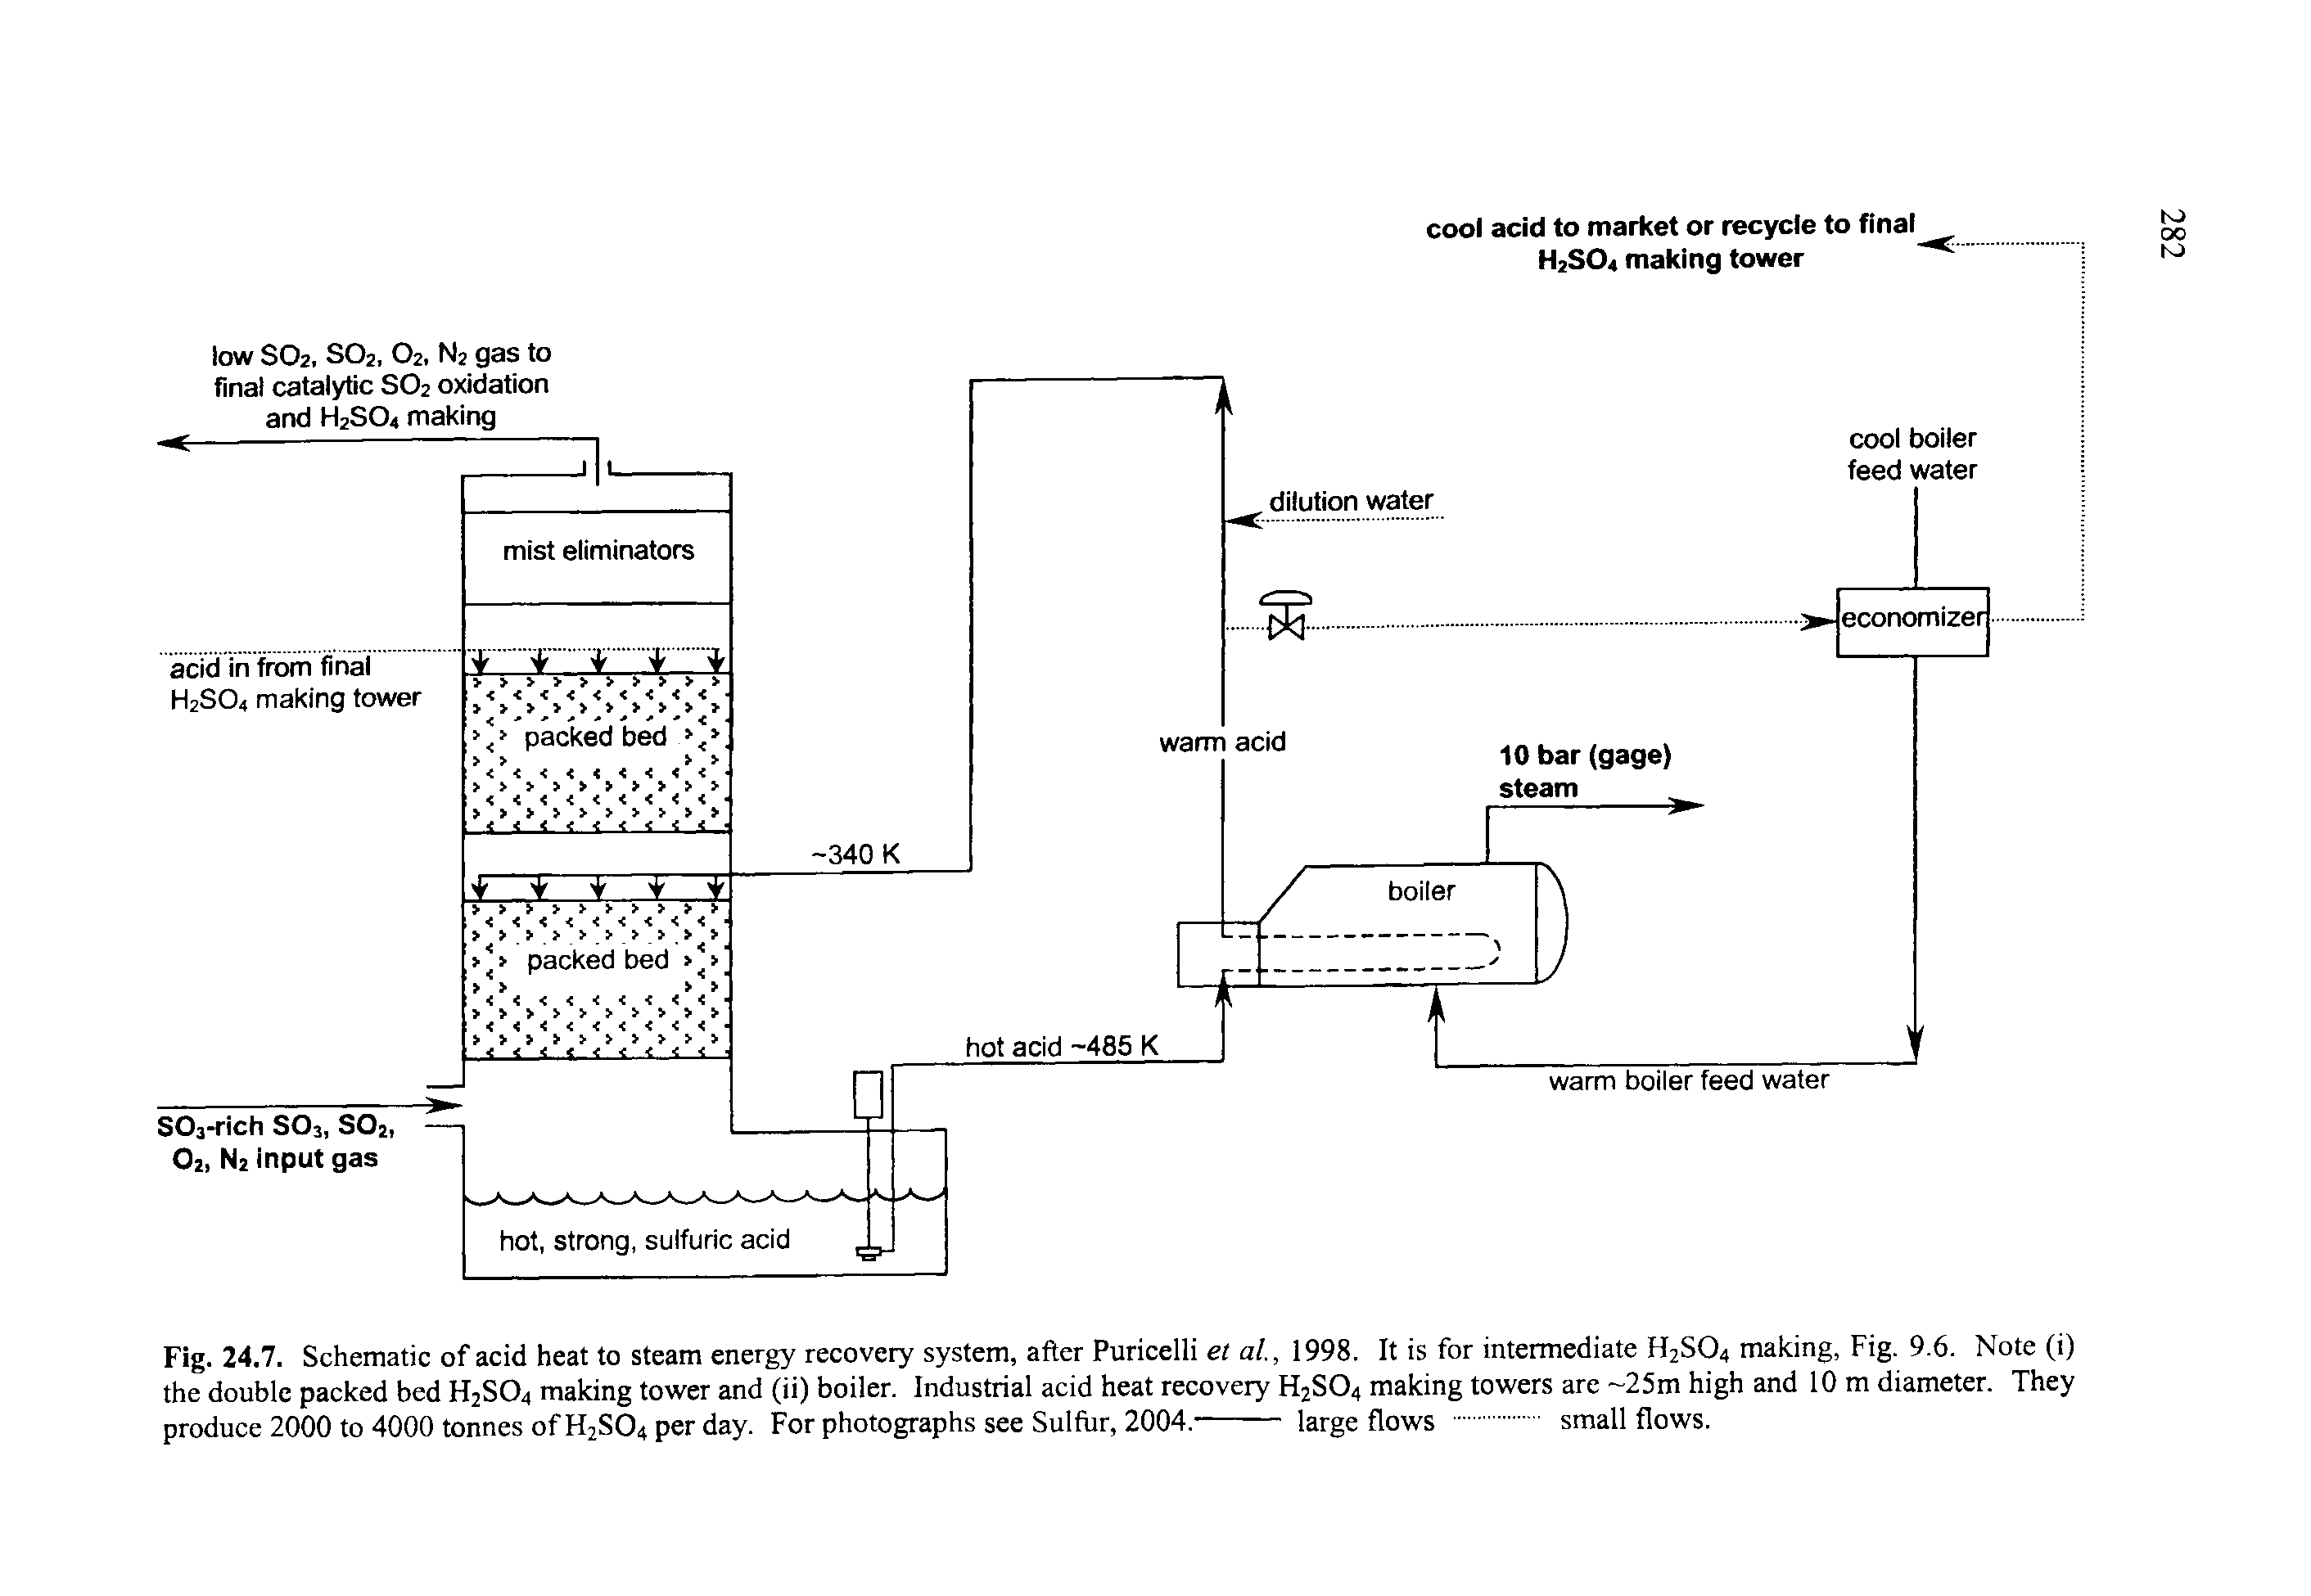 Fig. 24.7. Schematic of acid heat to steam energy recovery system, after Puricelli et al., 1998. It is for intermediate H2S04 making, Fig. 9.6. Note (i) the double packed bed H2S04 making tower and (ii) boiler. Industrial acid heat recovery H2S04 making towers are 25m high and 10 m diameter. They produce 2000 to 4000 tonnes of H2S04 per day. For photographs see Sulfur, 2004.--------- large flows. small flows.